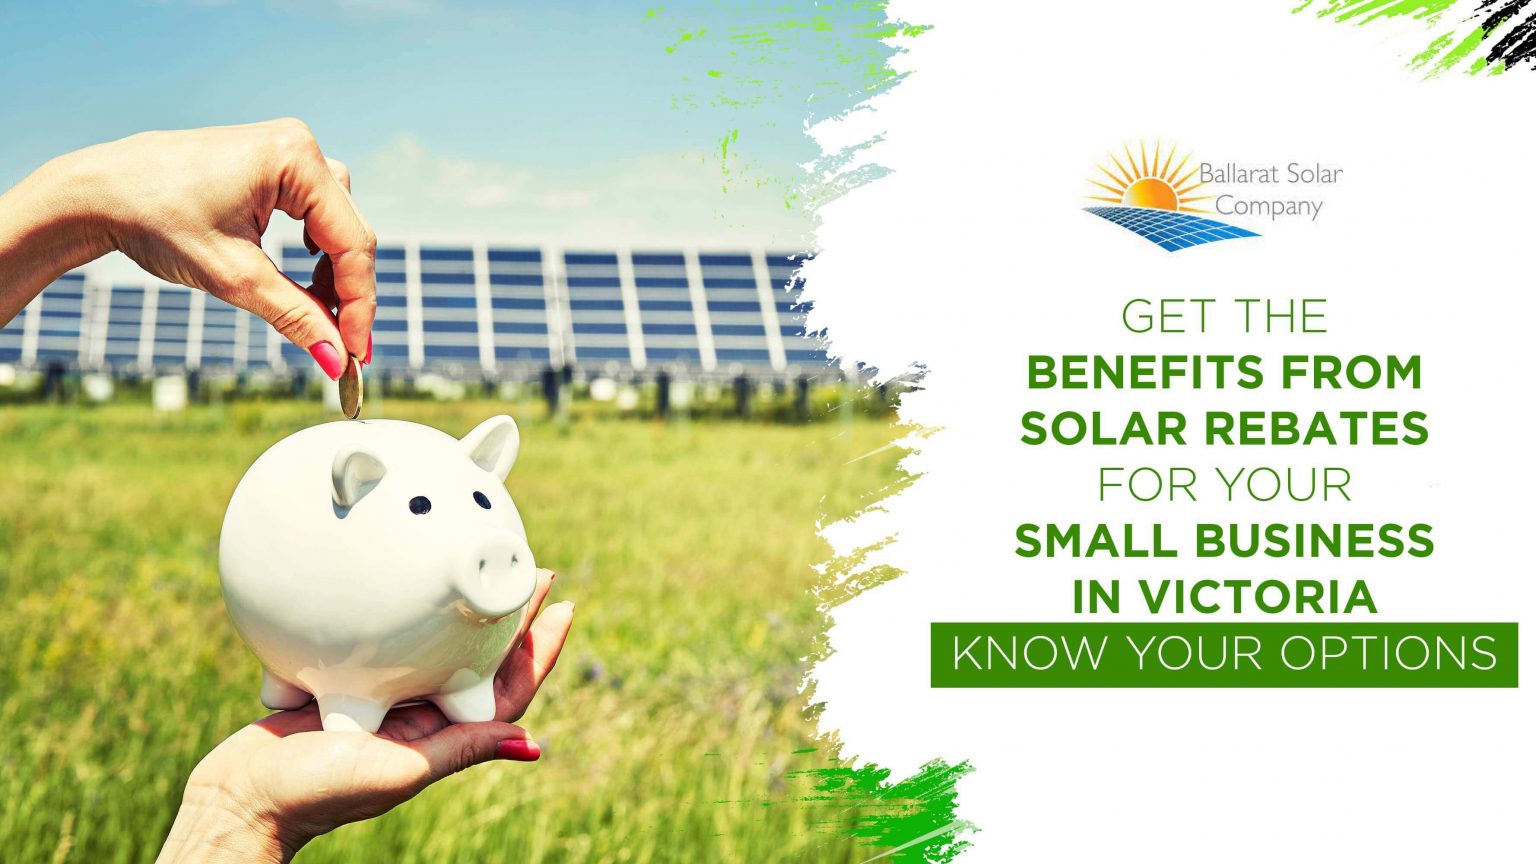 get-the-benefits-from-solar-rebates-for-your-small-business-in-victoria